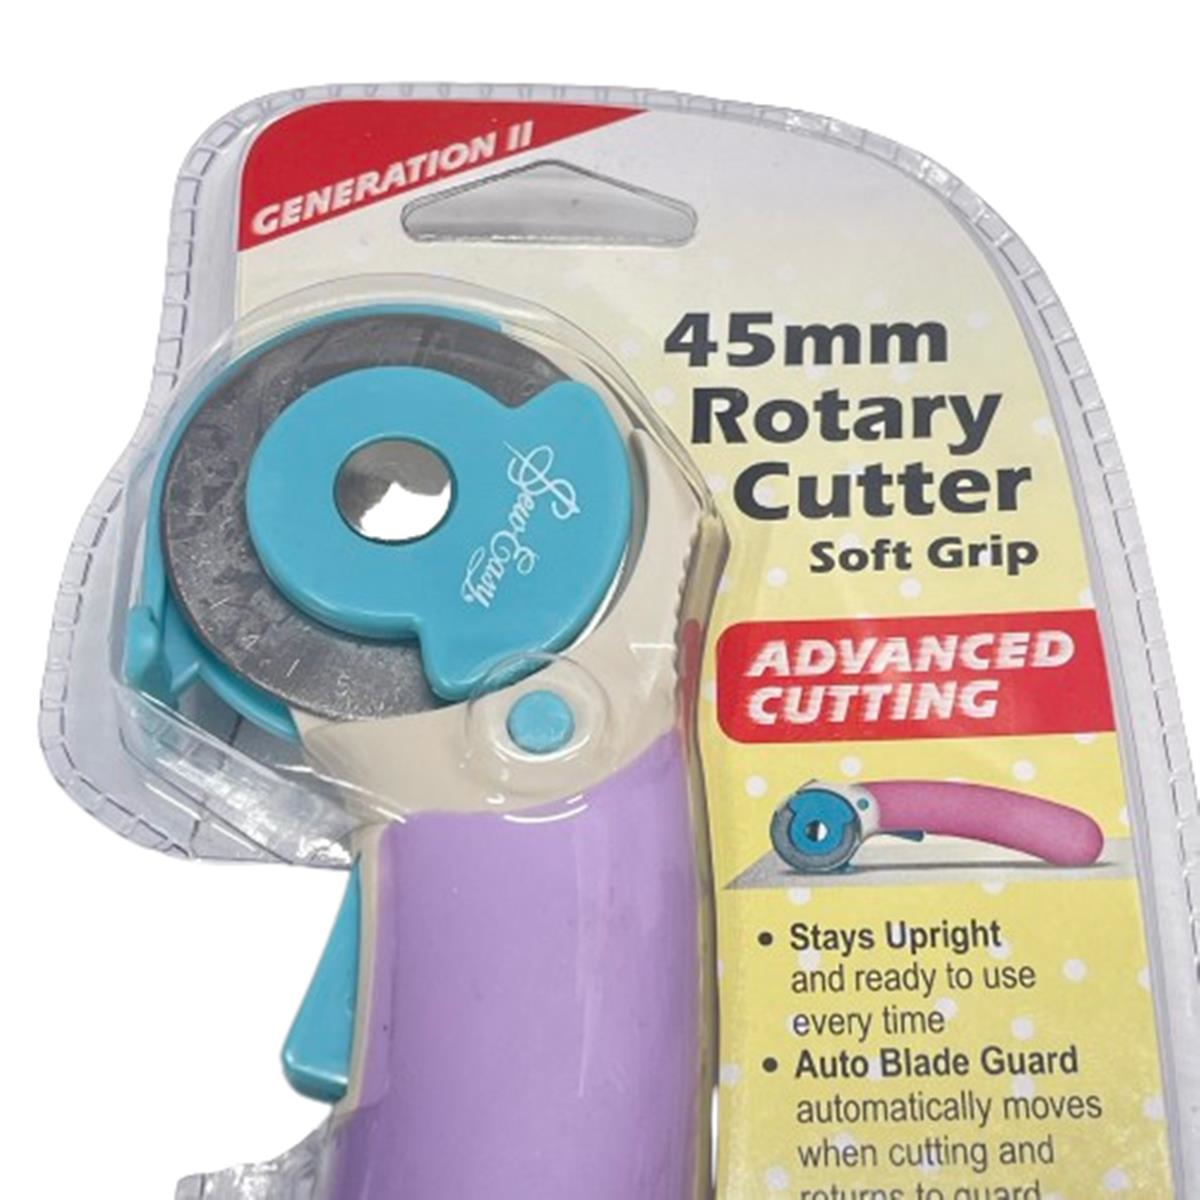 Sew Easy Rotary Cutter Dairesel Yuvarlak Makas 45mm ER4095.LILAC